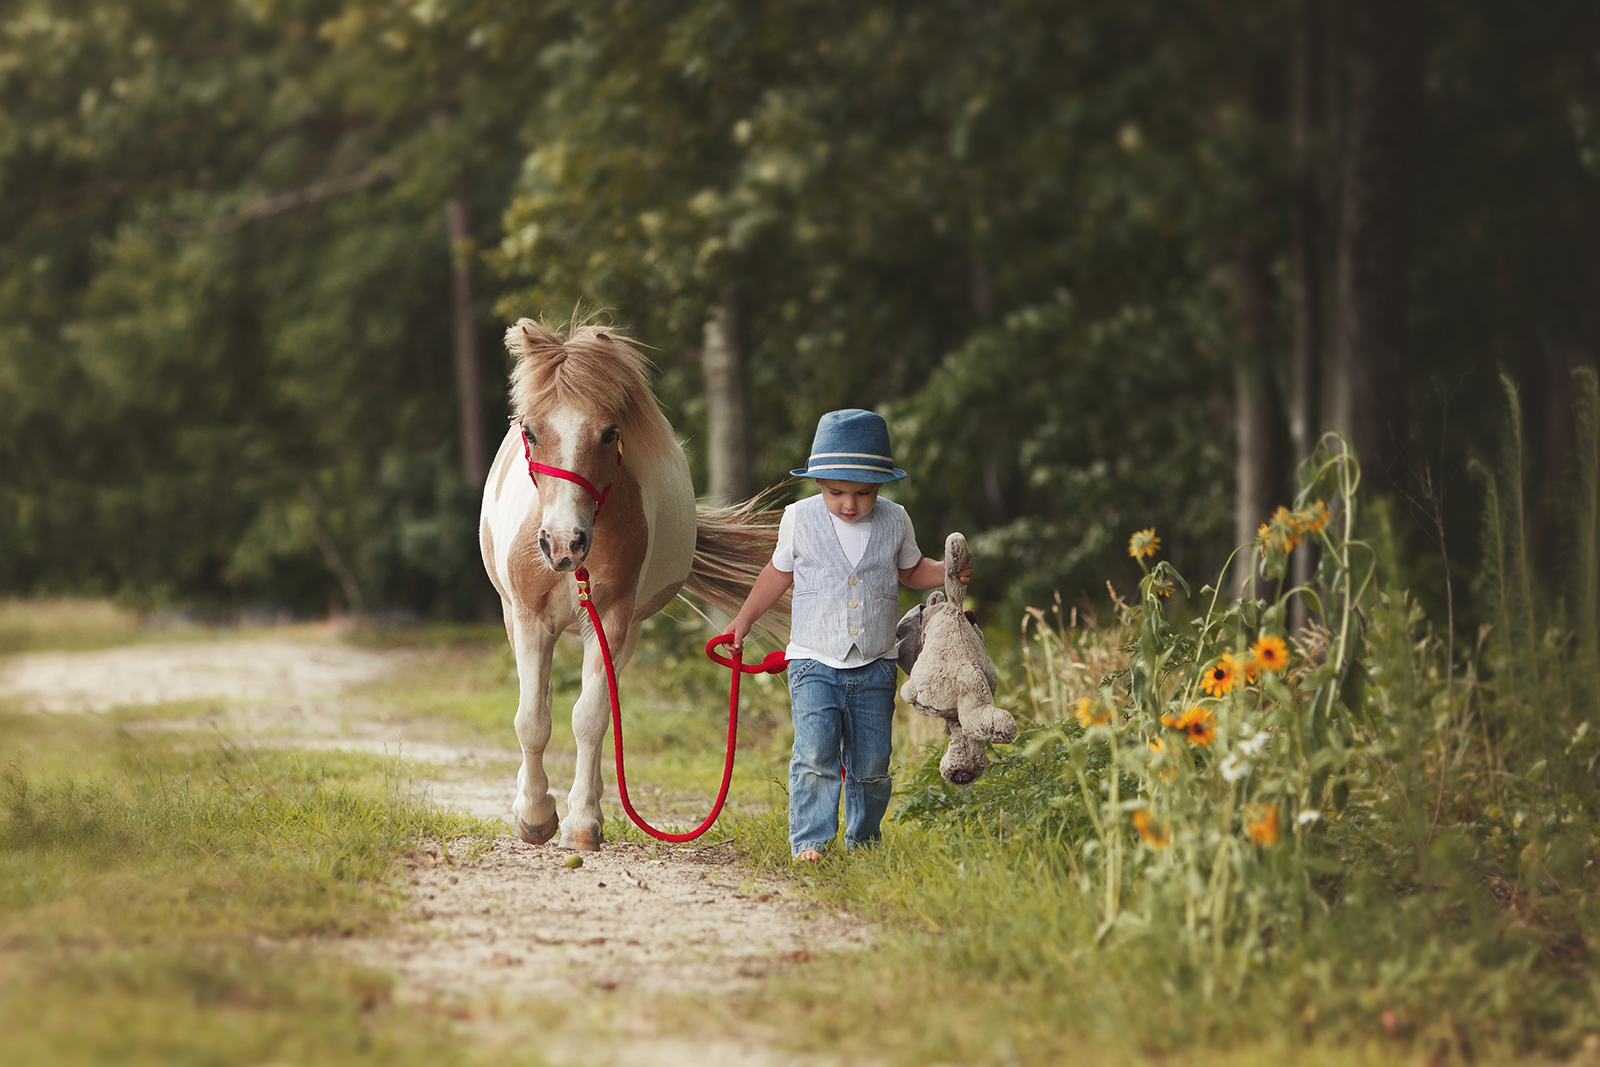 Raleigh child photography with animals